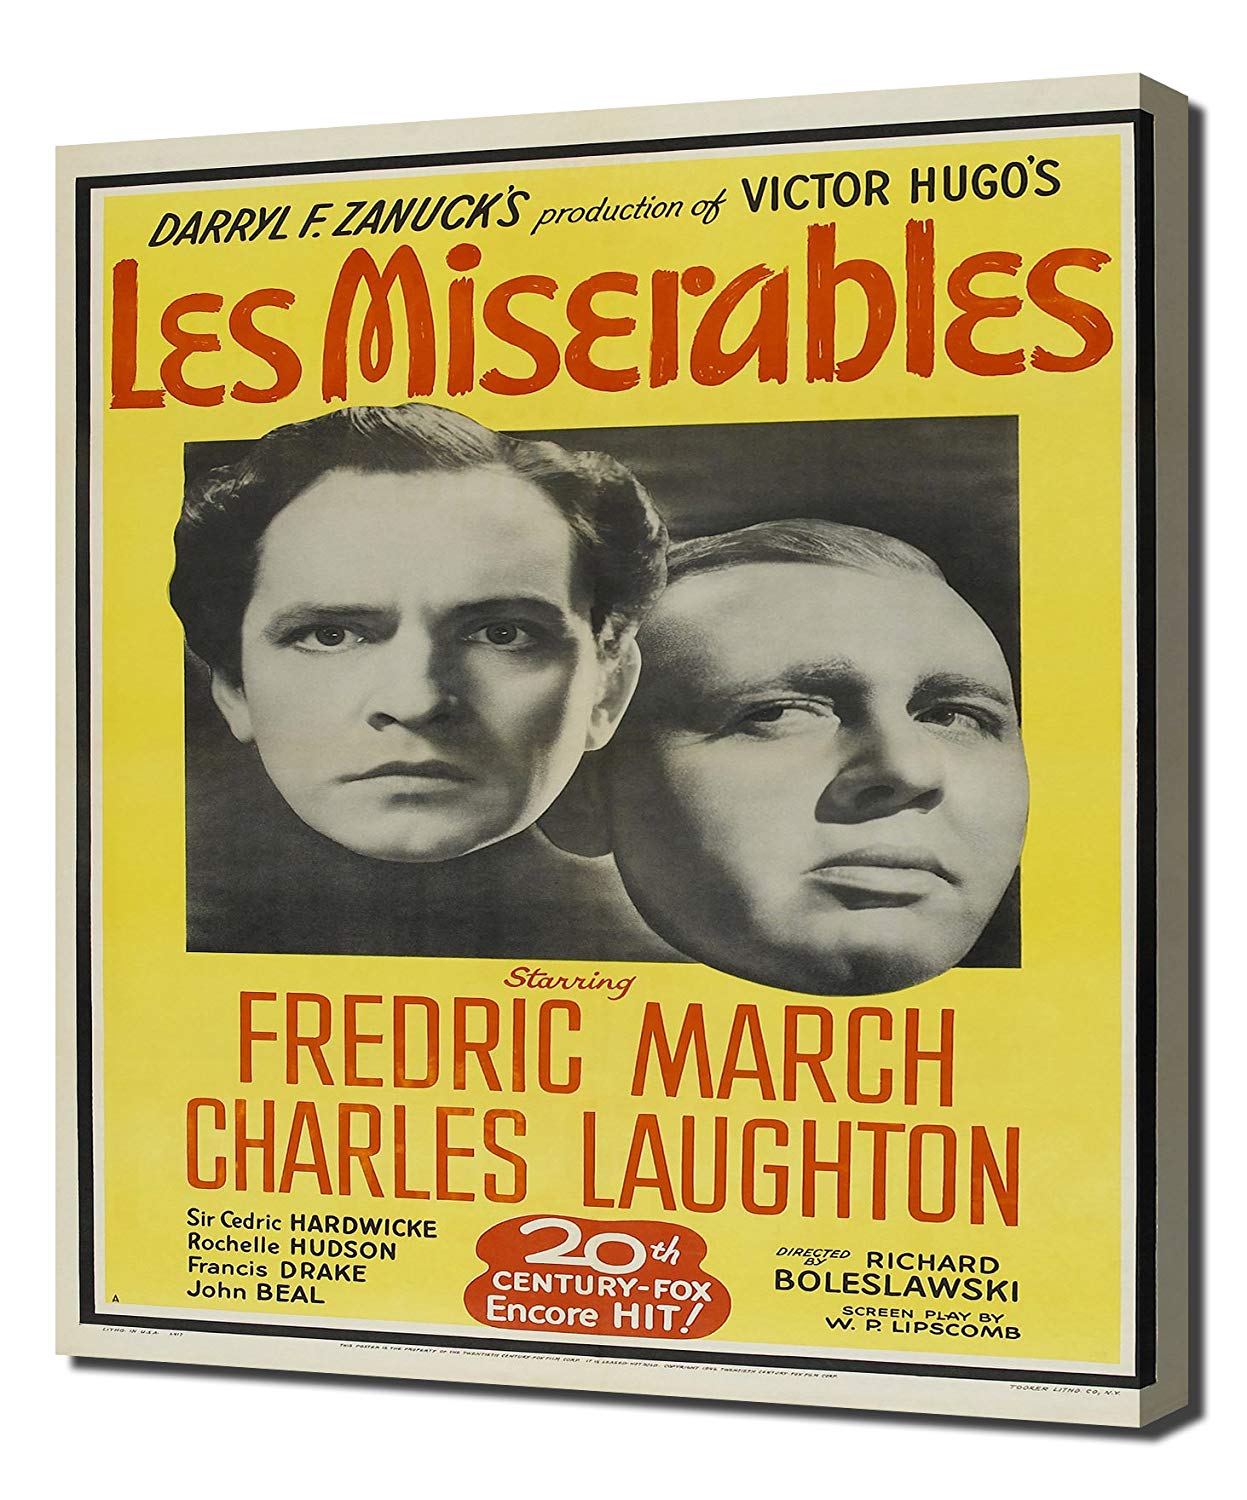 Les Miserables (1935) starring Frederic March, Charles Laughton